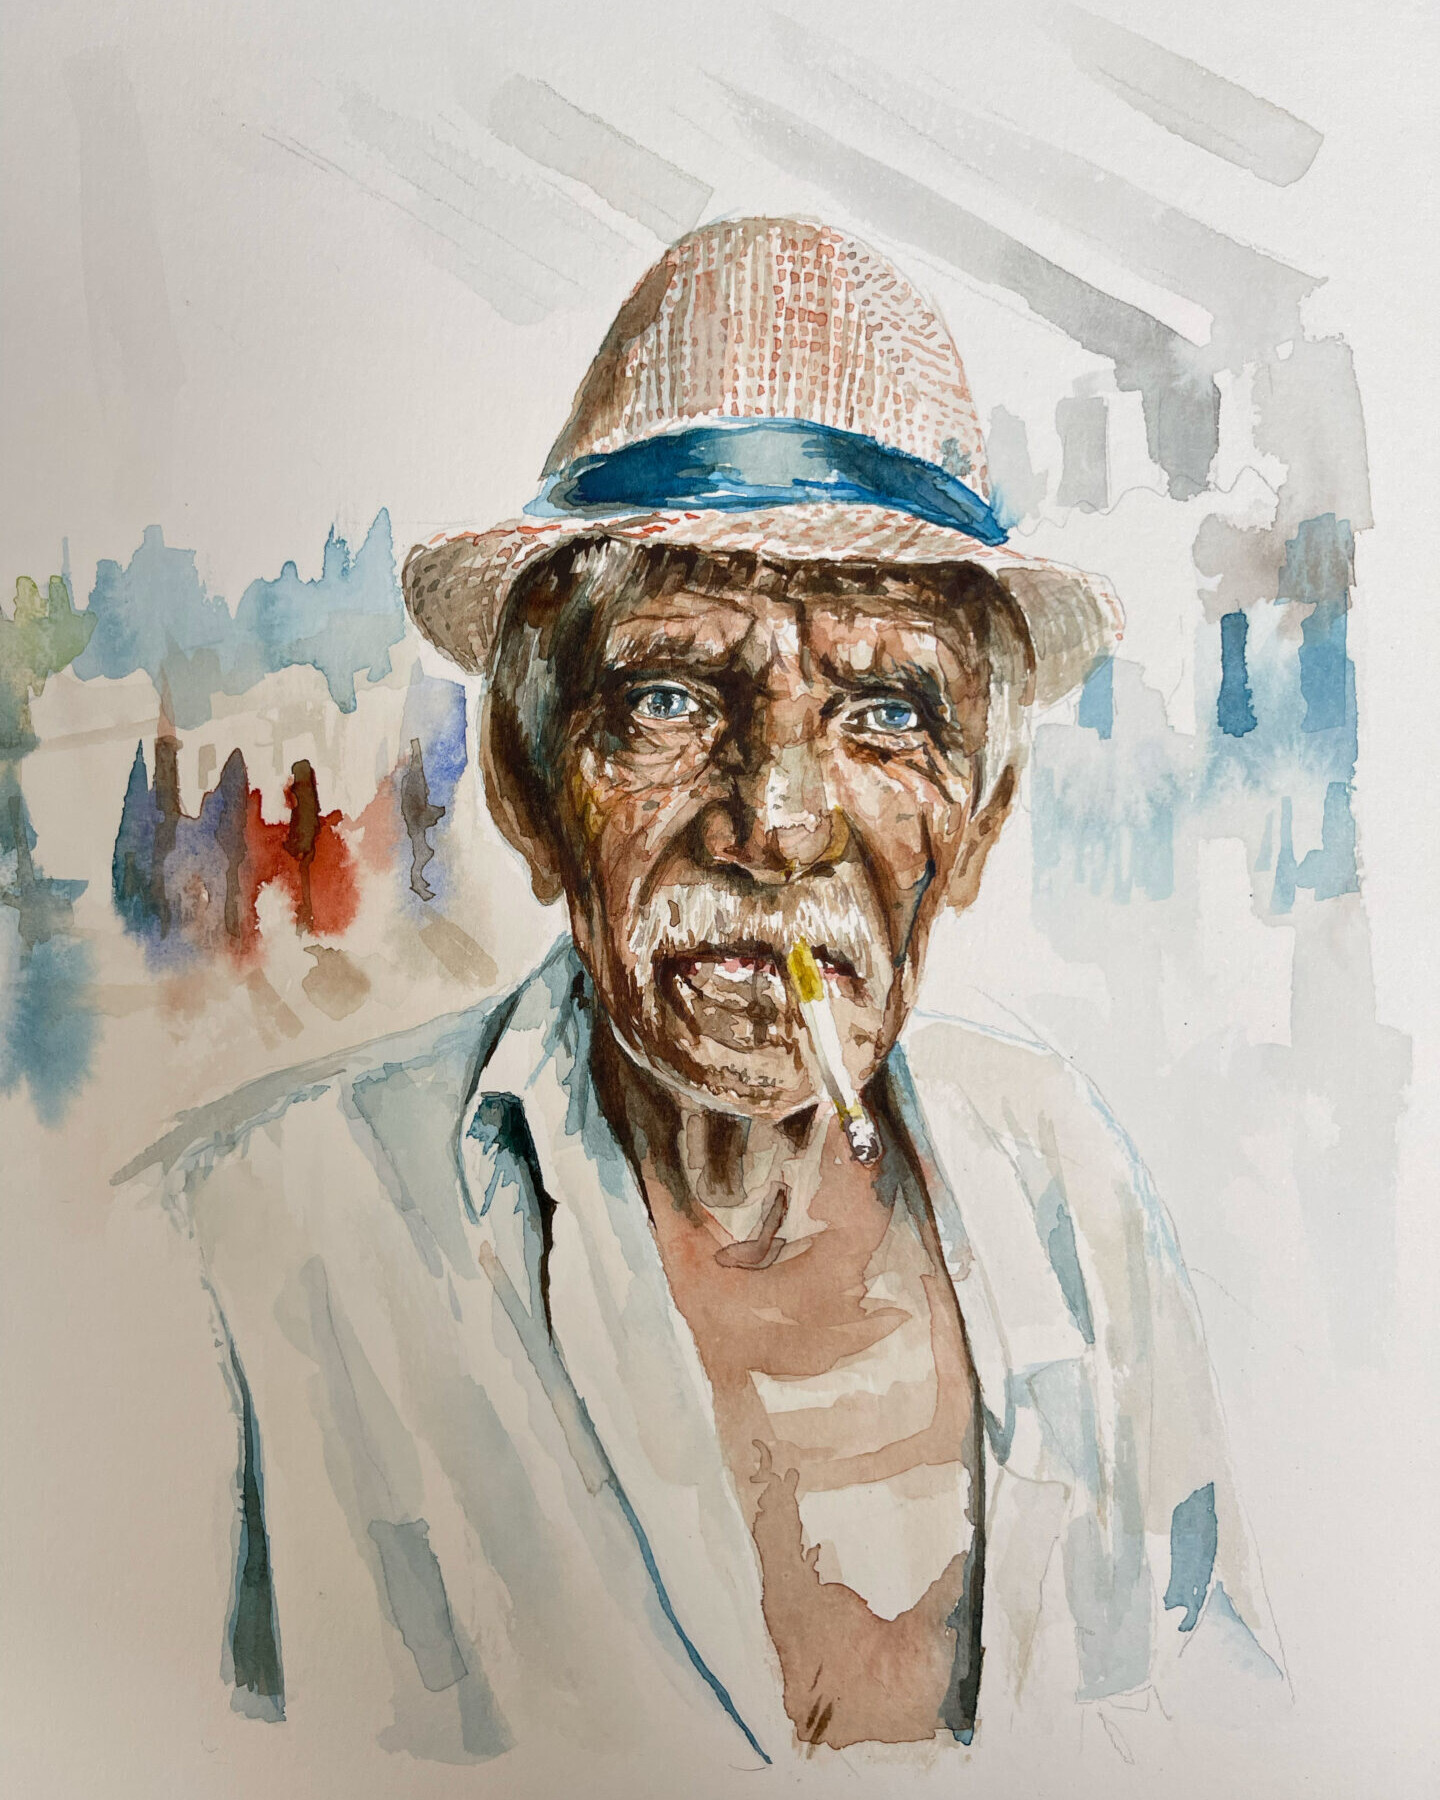 A watercolor portrait of an elderly man with a kind face and gentle expression, painted by artist Alex Righetto